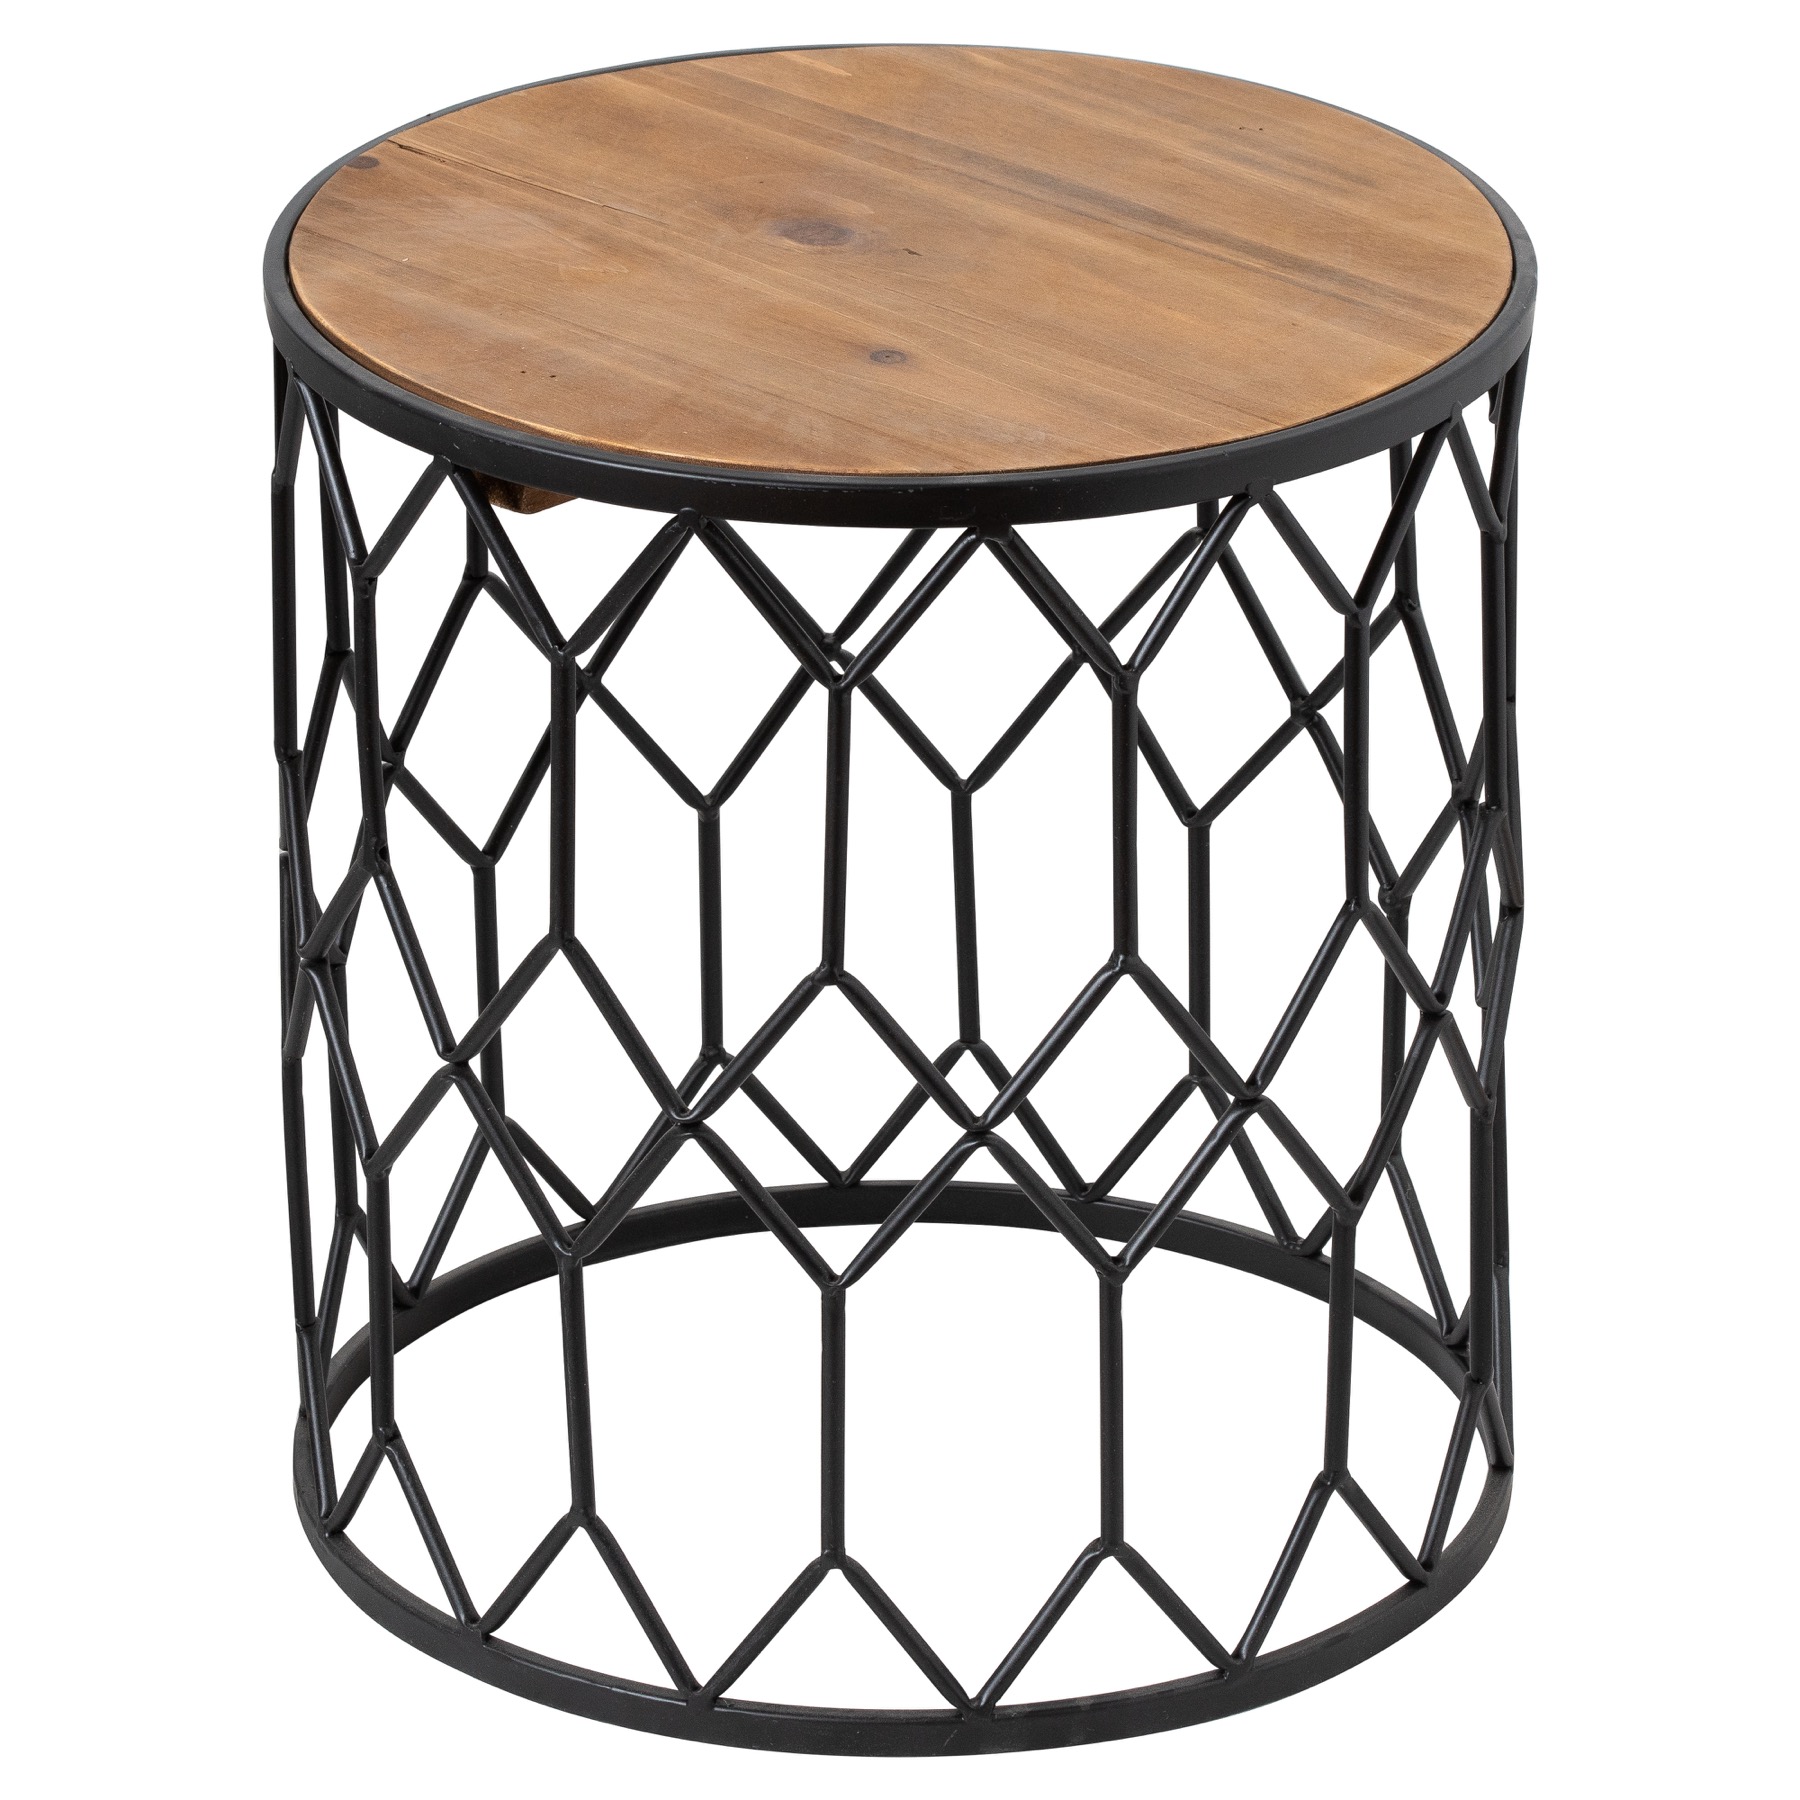 Set Of Three Honeycomb Side Tables - Image 4